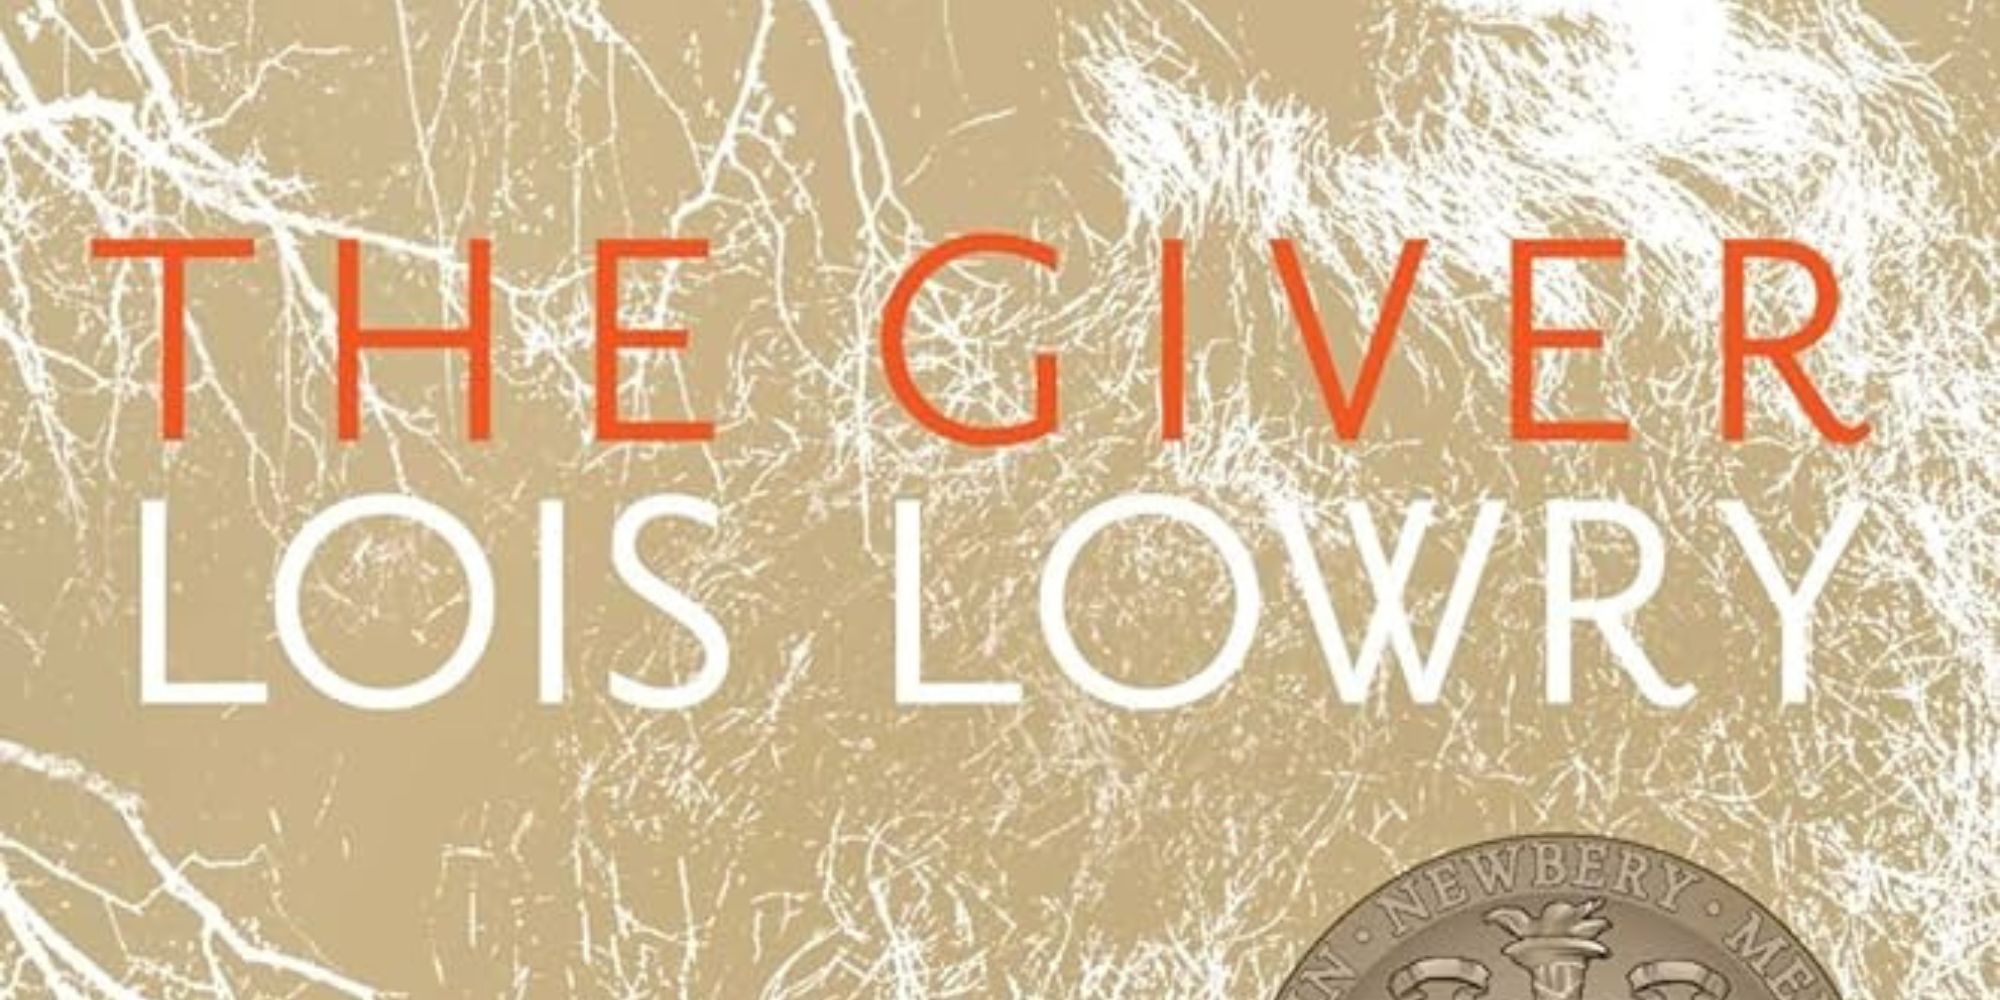 The Giver book cover cropped